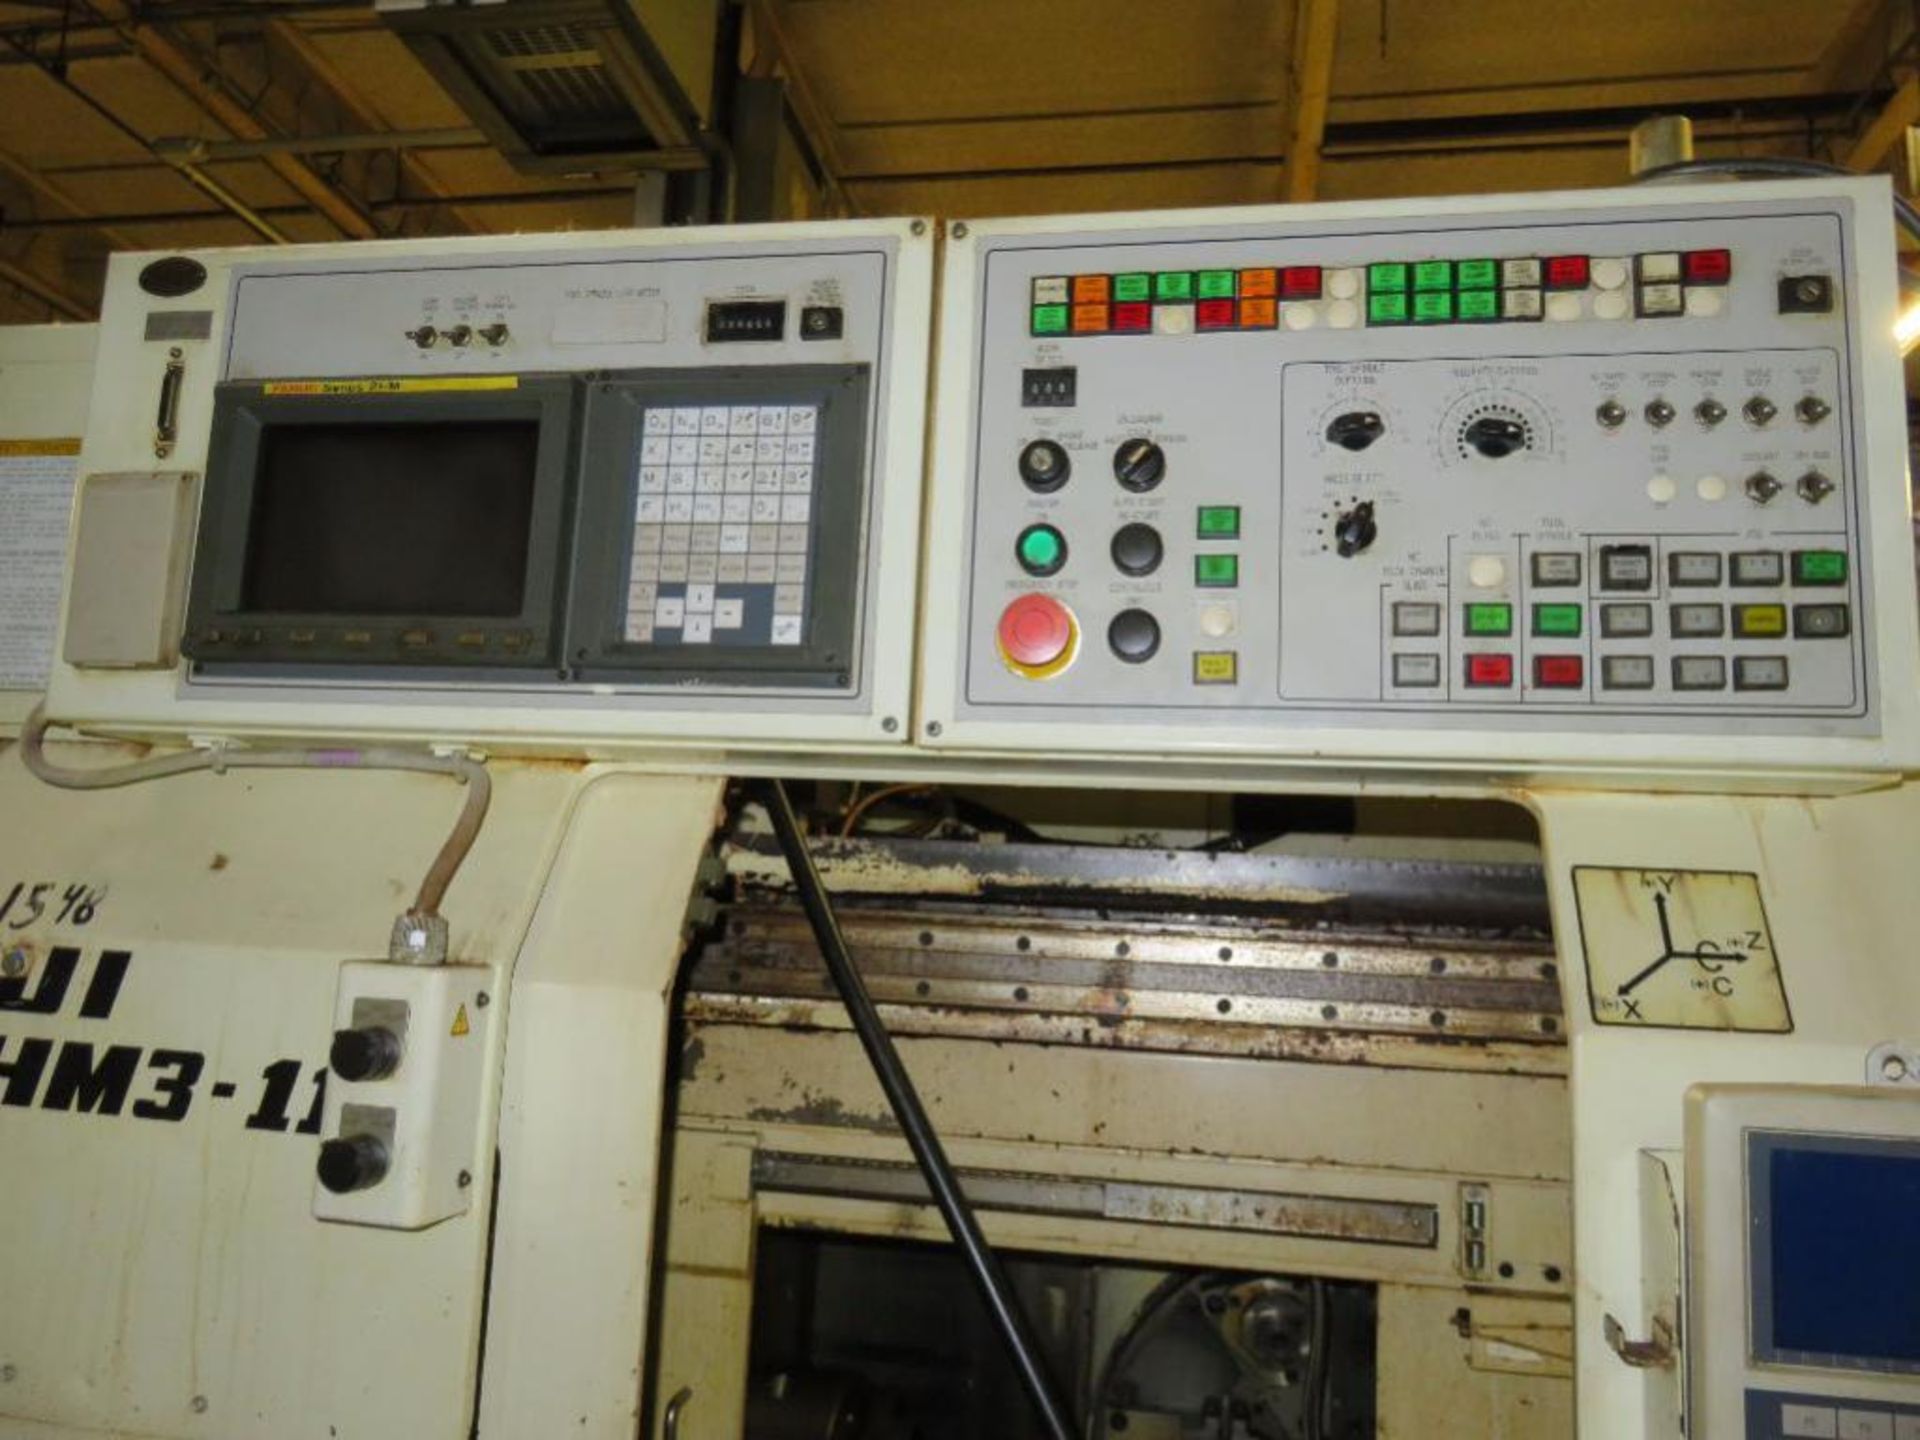 Fuji 4-Axis CNC Turning Center Model HM3-AL, S/N 12098 (1998) (Location K) - Image 2 of 3